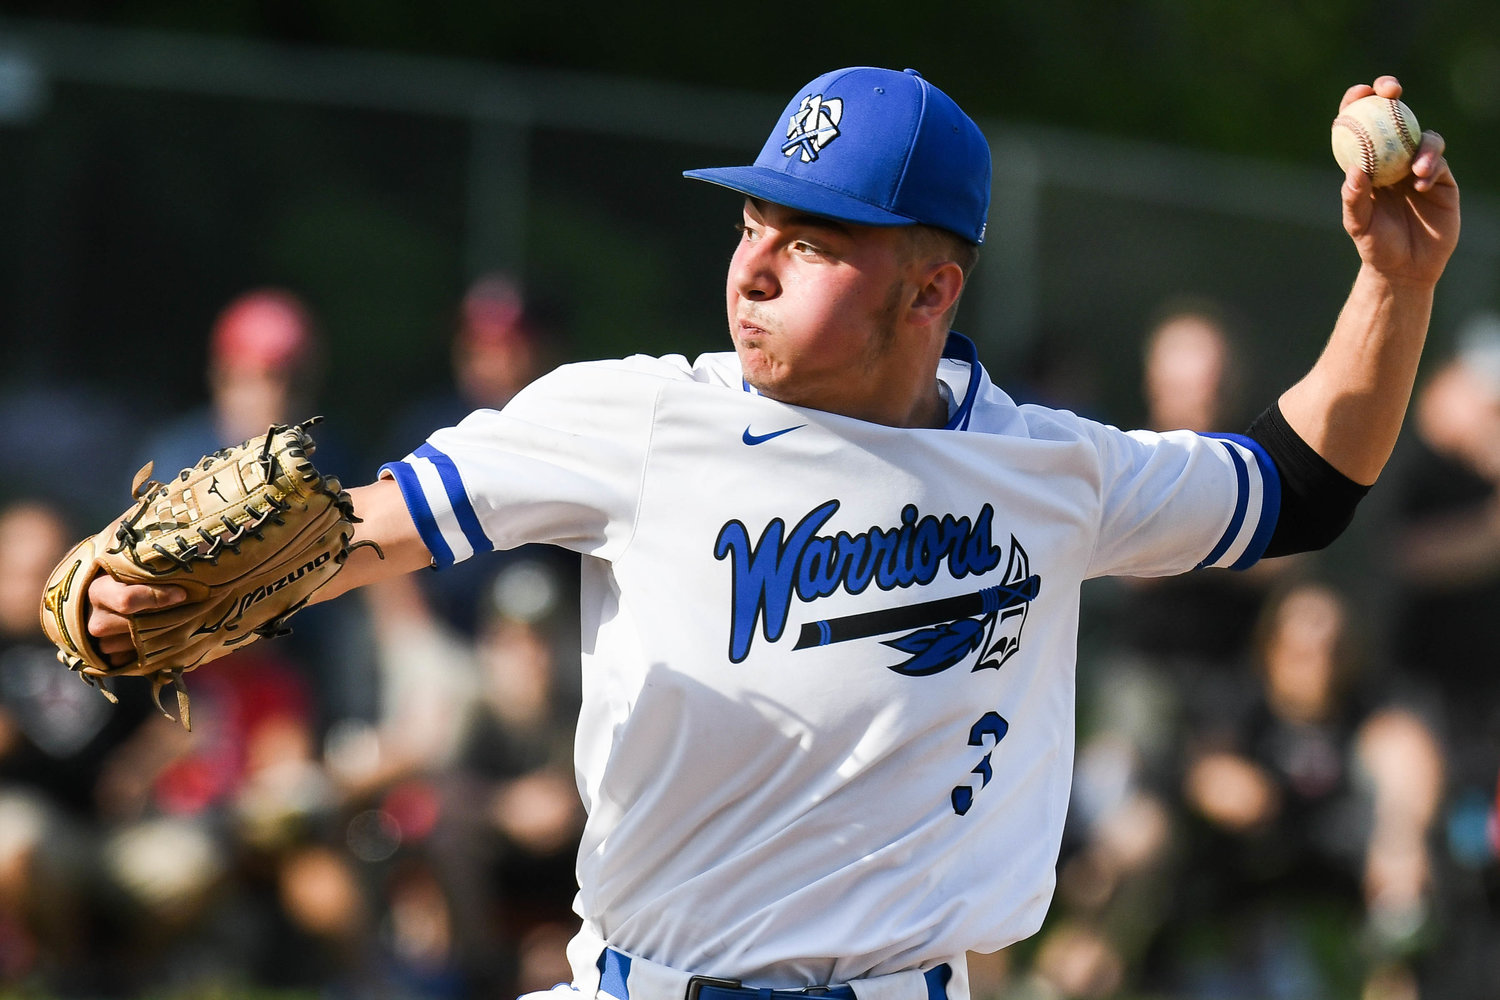 Whitesboro's Colin Skermont delivers a pitch during the game against Jamesville-Dewitt on Thursday. Skermont threw a complete game in the team's 4-2 win to advance to the Section III Class A semifinals.